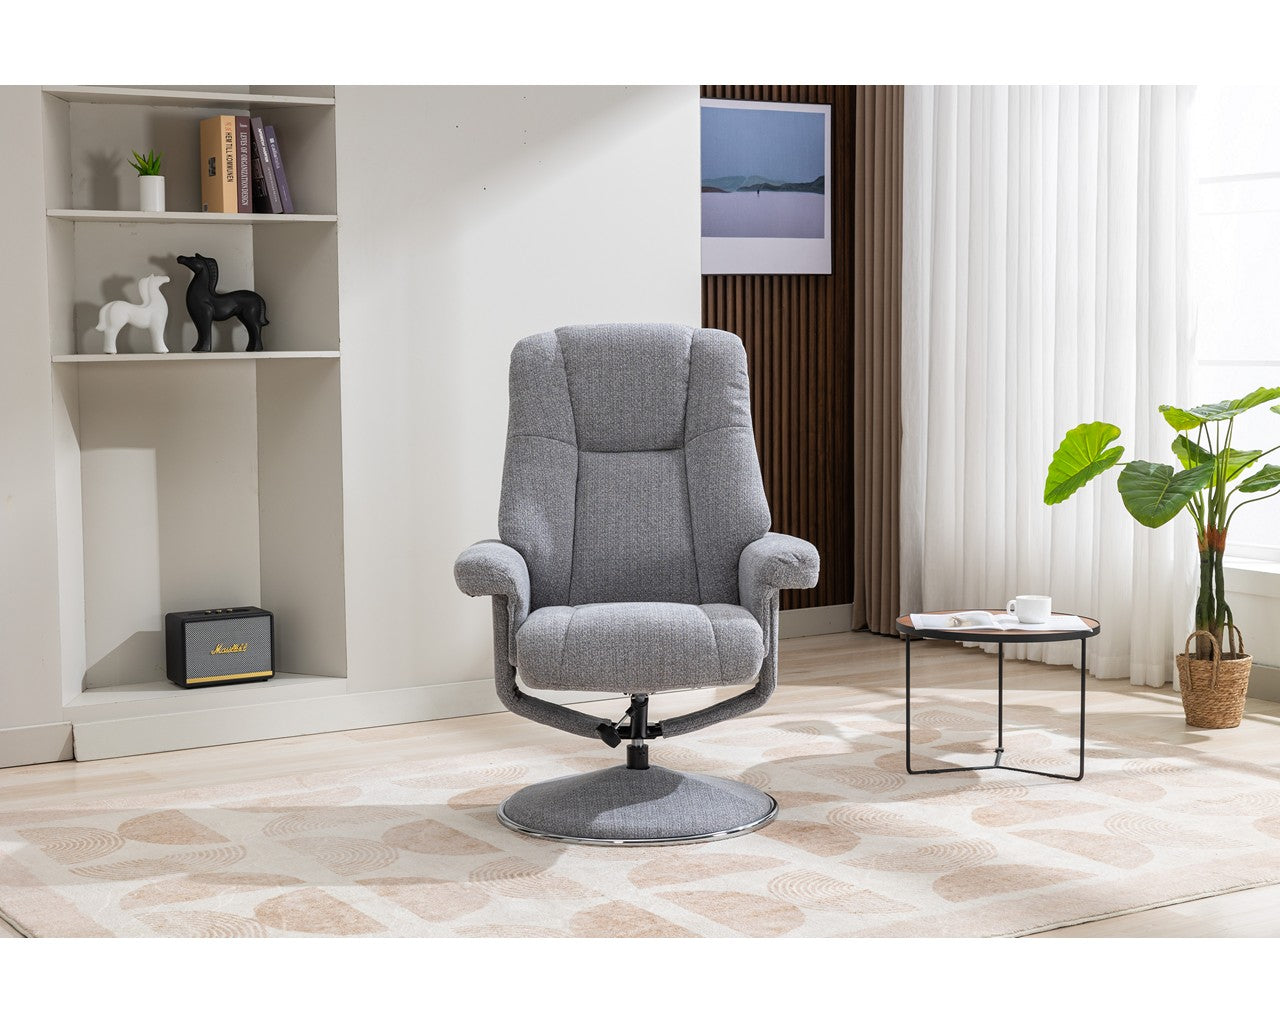 Swivel Recliner Chair Collection - Denver: Chacha Dove